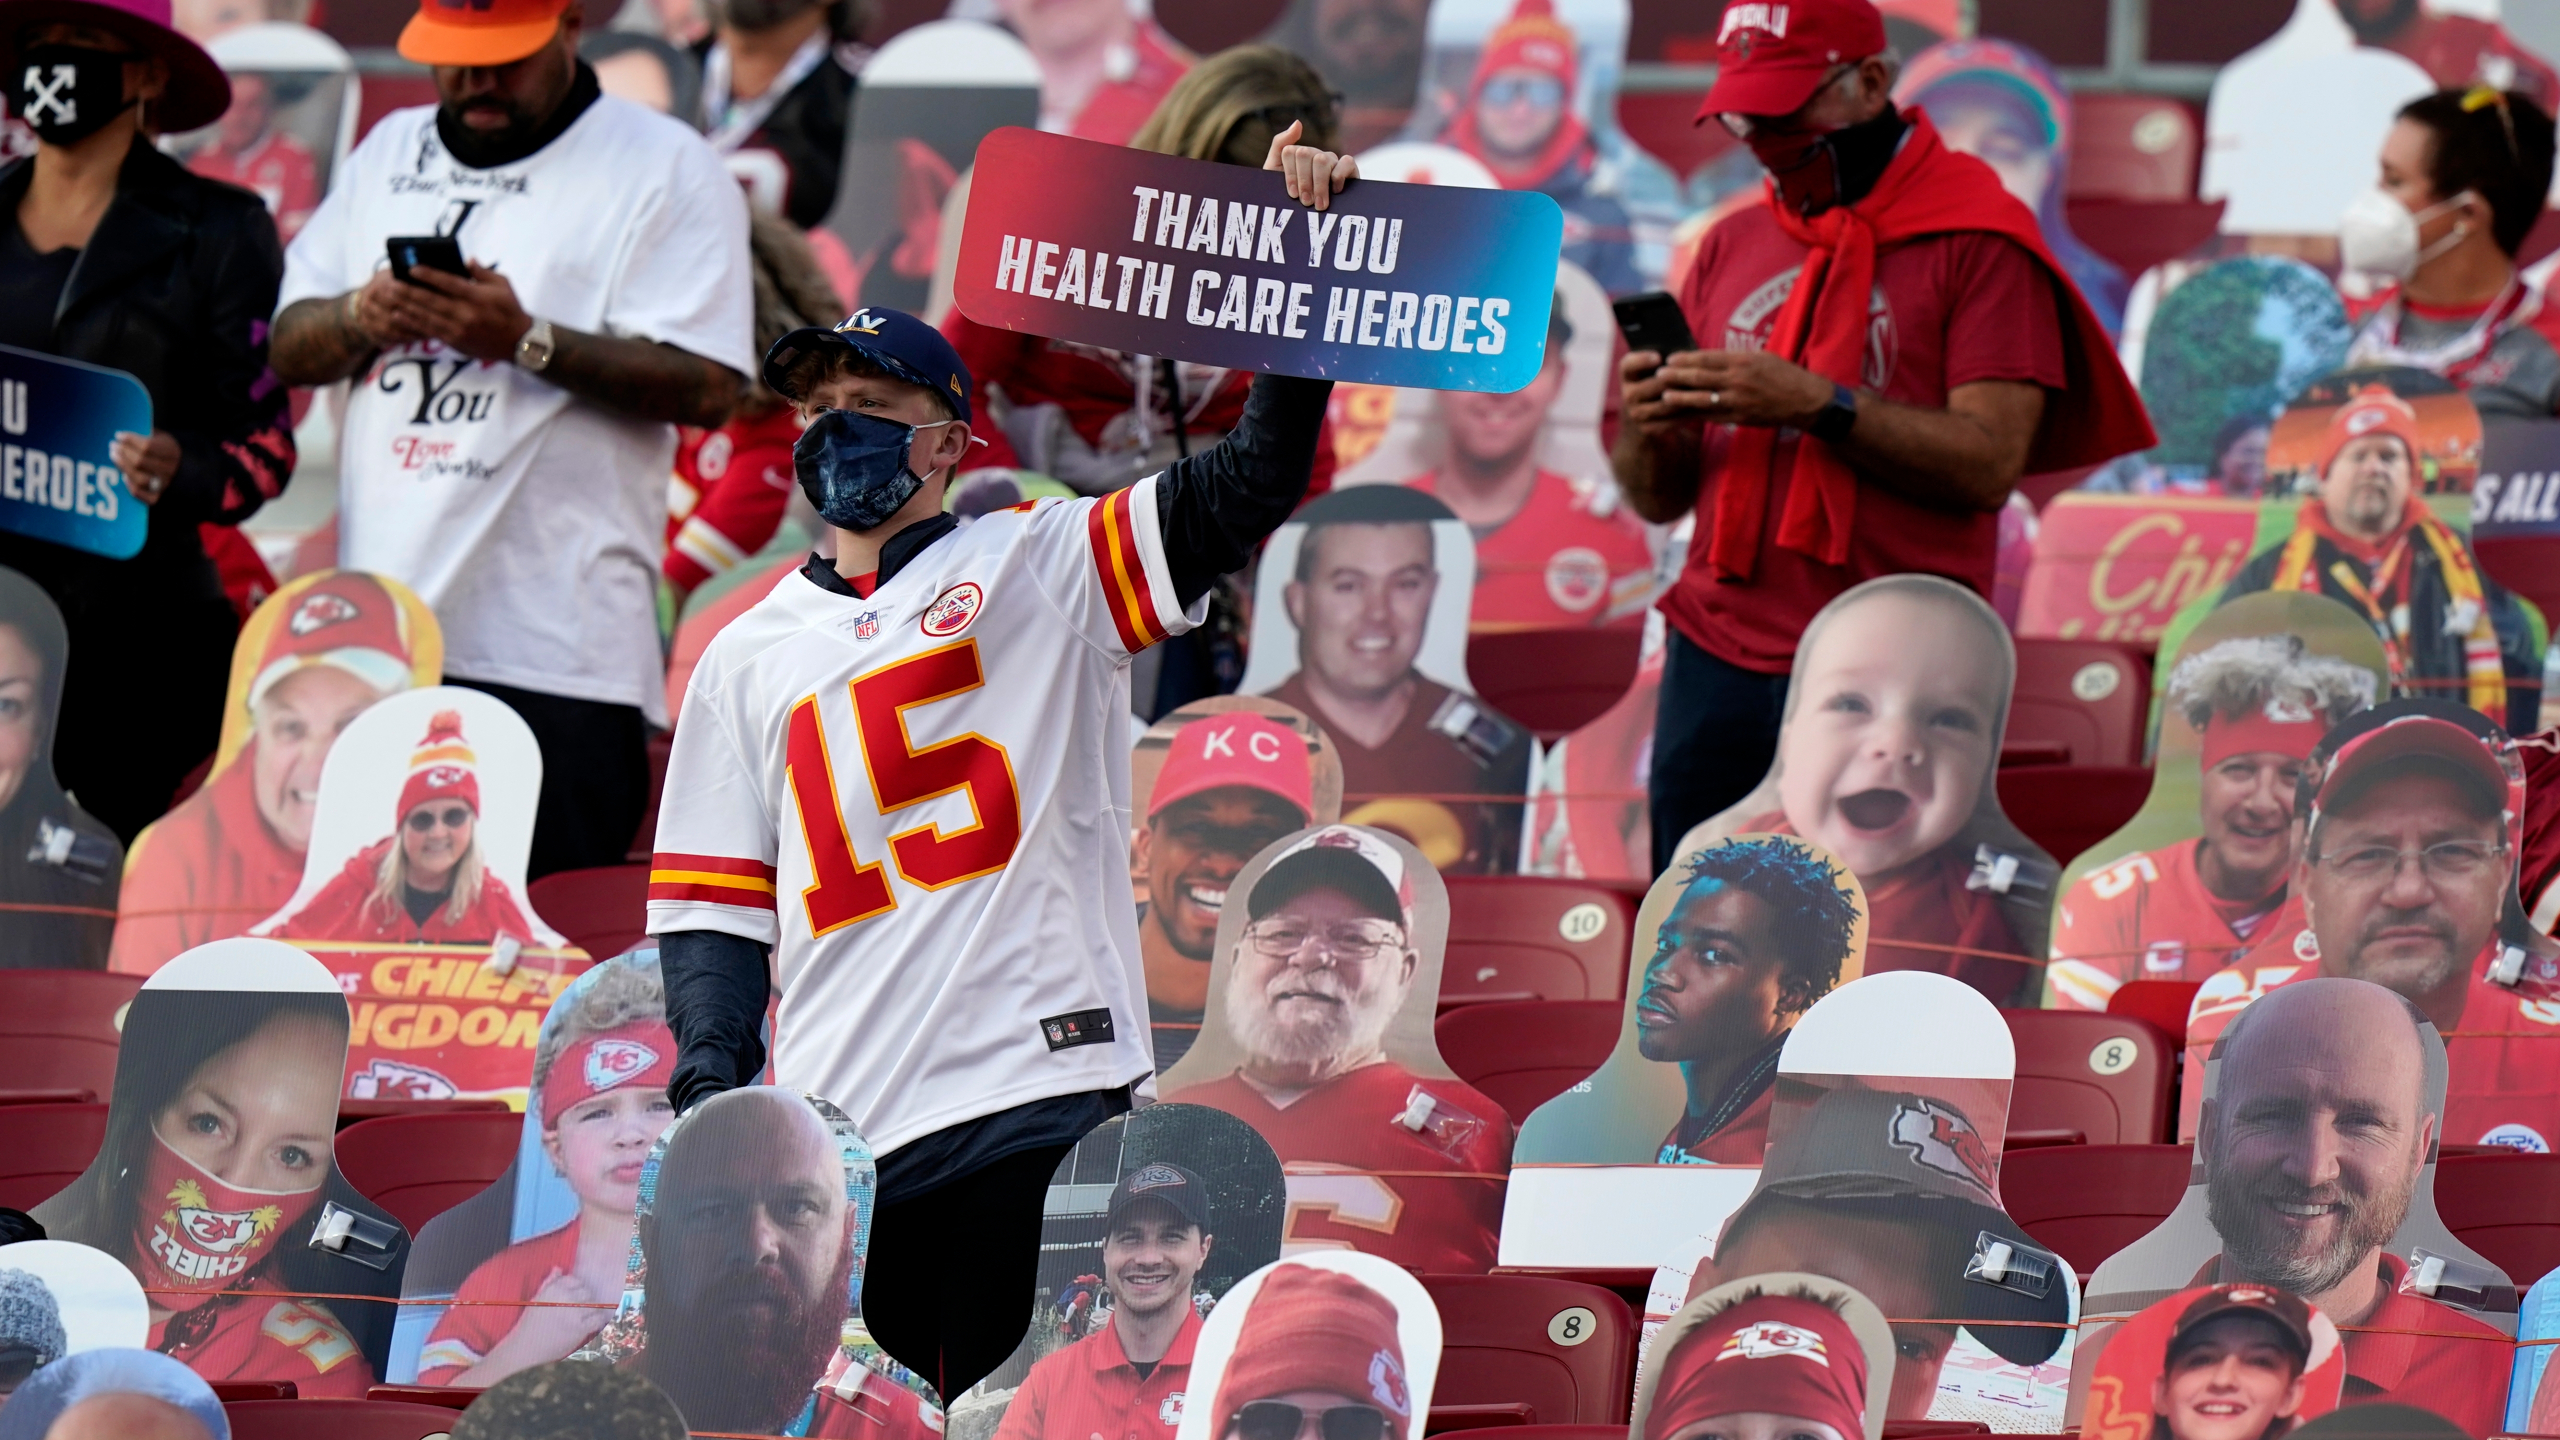 A Fan Holds Up A Sign Honoring Heart Care Workers Before The NFL Super Bowl 55 Football Game Between The Kansas City Chiefs And Tampa Bay Buccaneers, Sunday, Feb. 7, 2021, In Tampa, Fla. (AP Photo/Lynne Sladky)